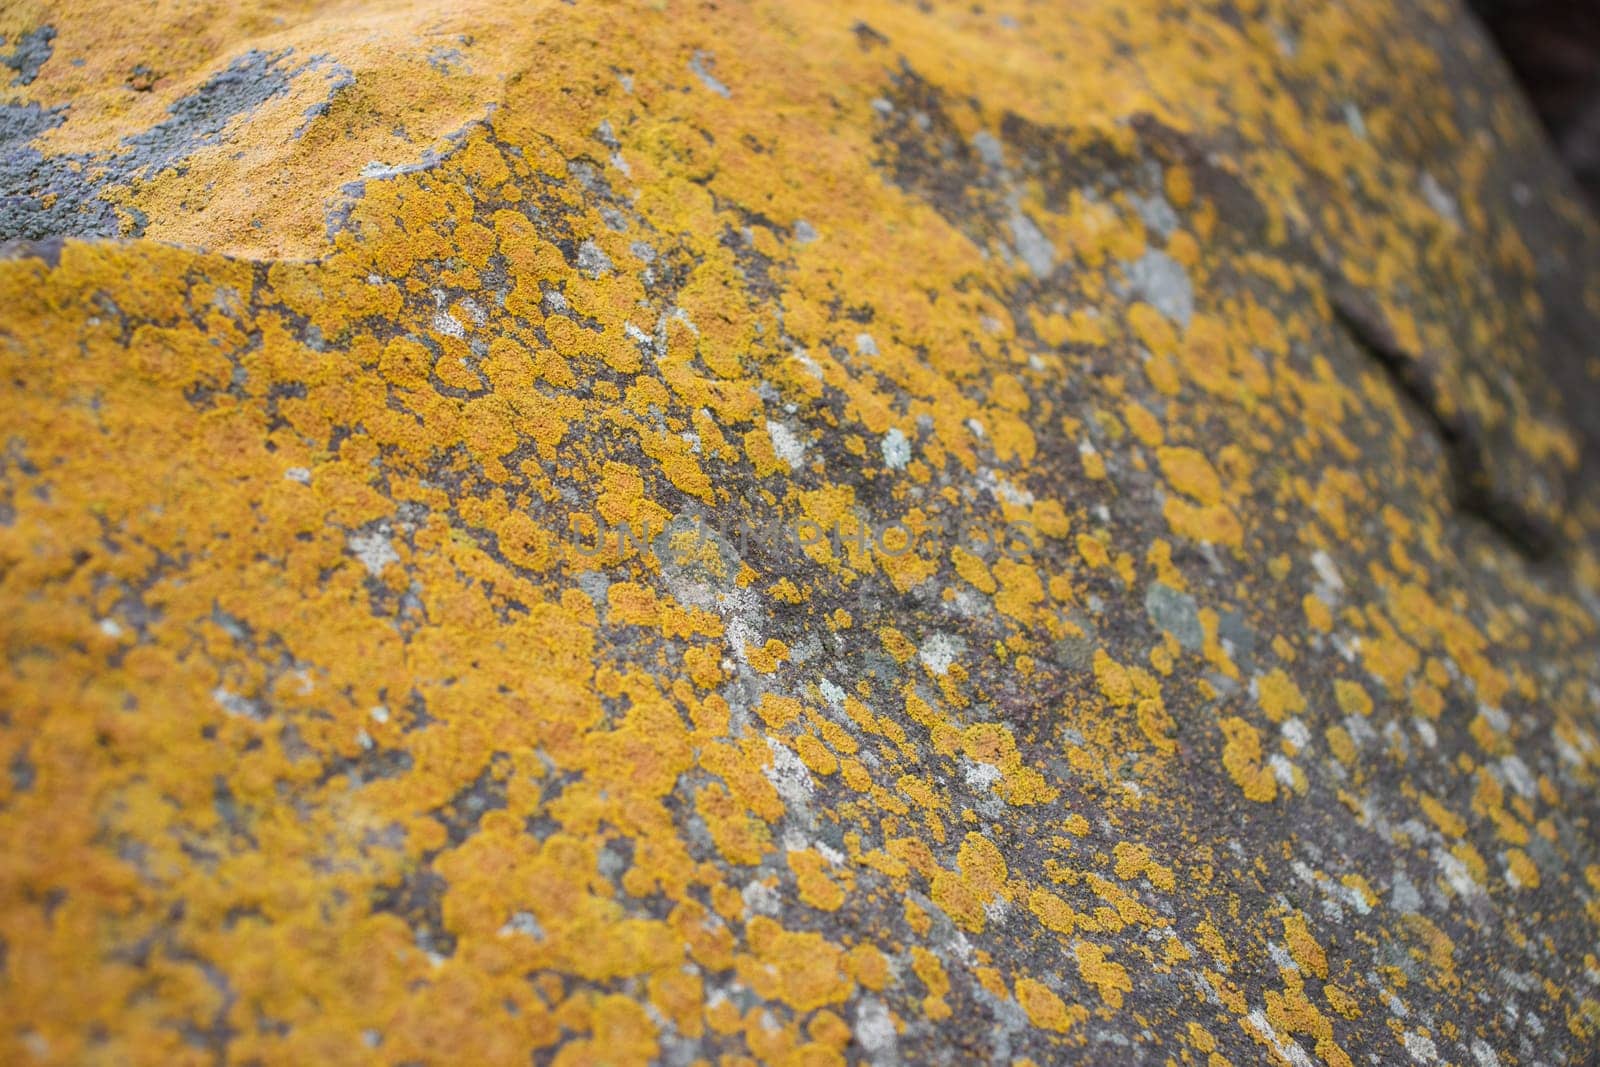 Close up yellow lichen cover the rough stone concept photo. Show with macro view. Rocks full of the moss by _Nataly_Nati_